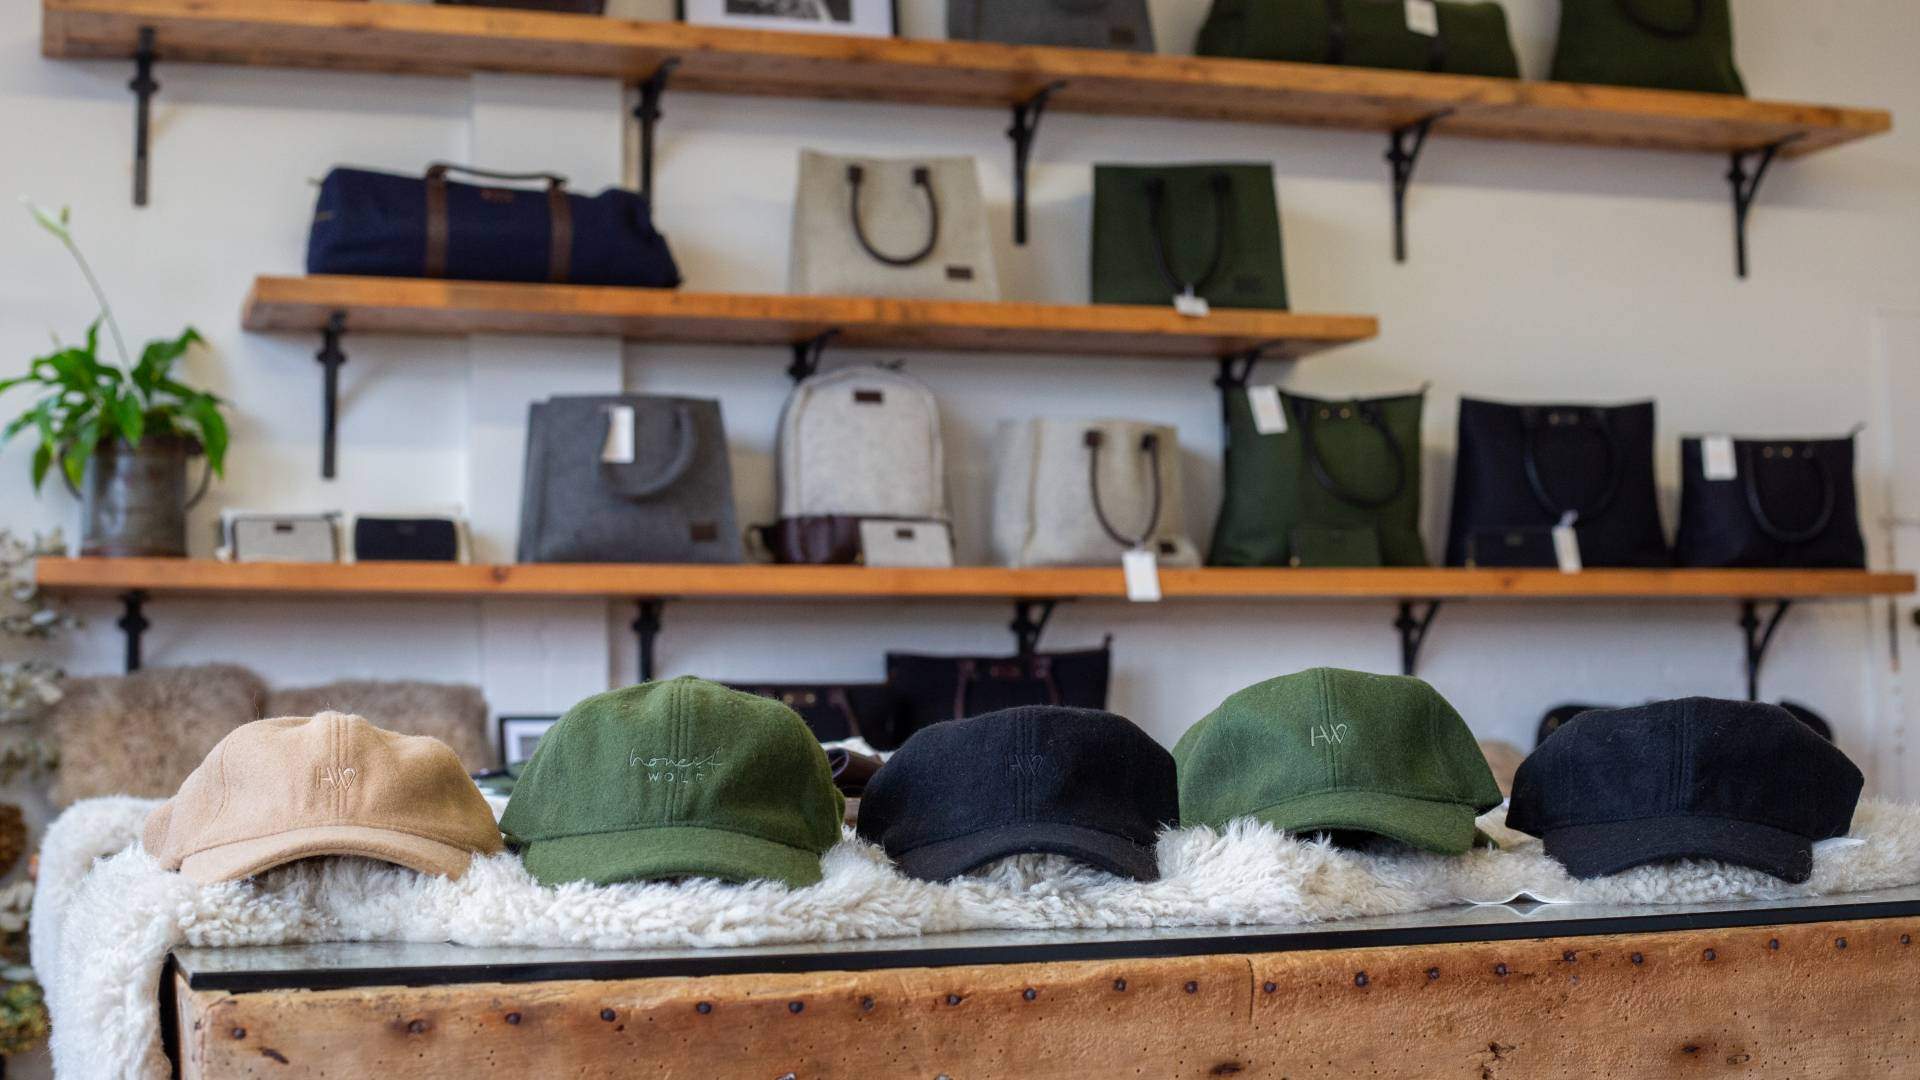 Husband and Wife Wool-Farming Team Honest Wolf Have Opened a Stunning Flagship Store in Hunterville